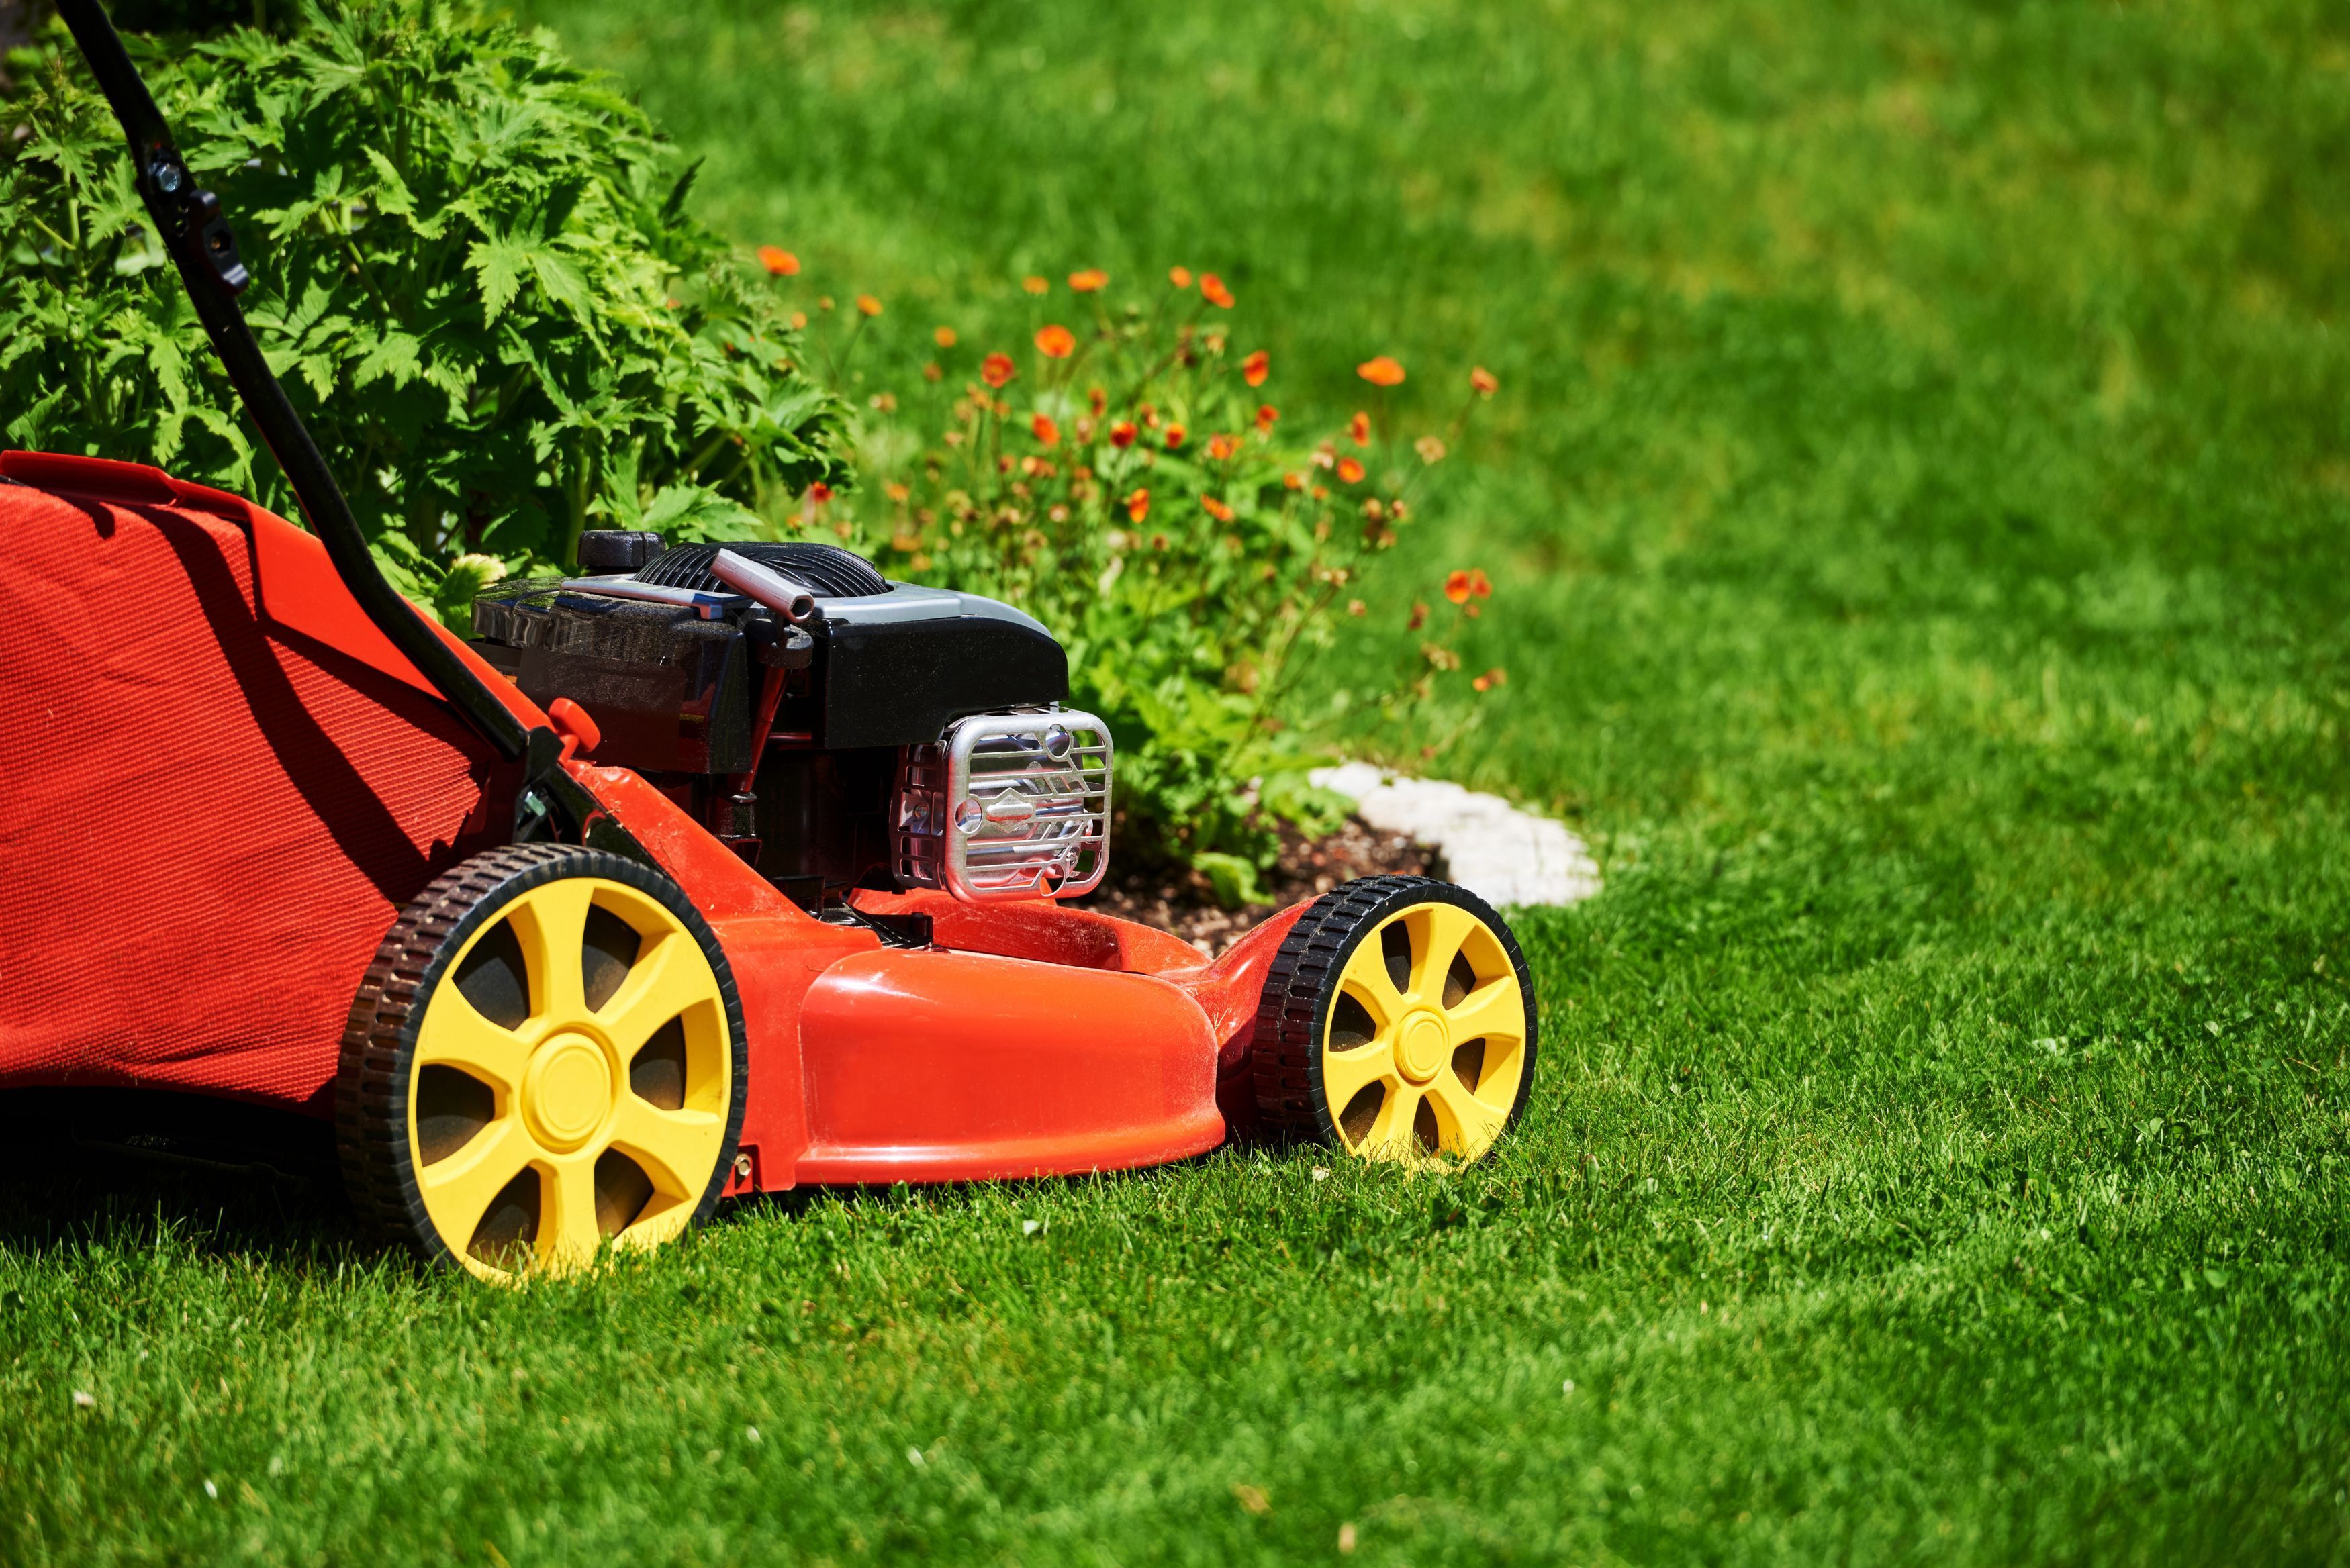 Sweat it out mowing the lawn (Thinkstock/PA)